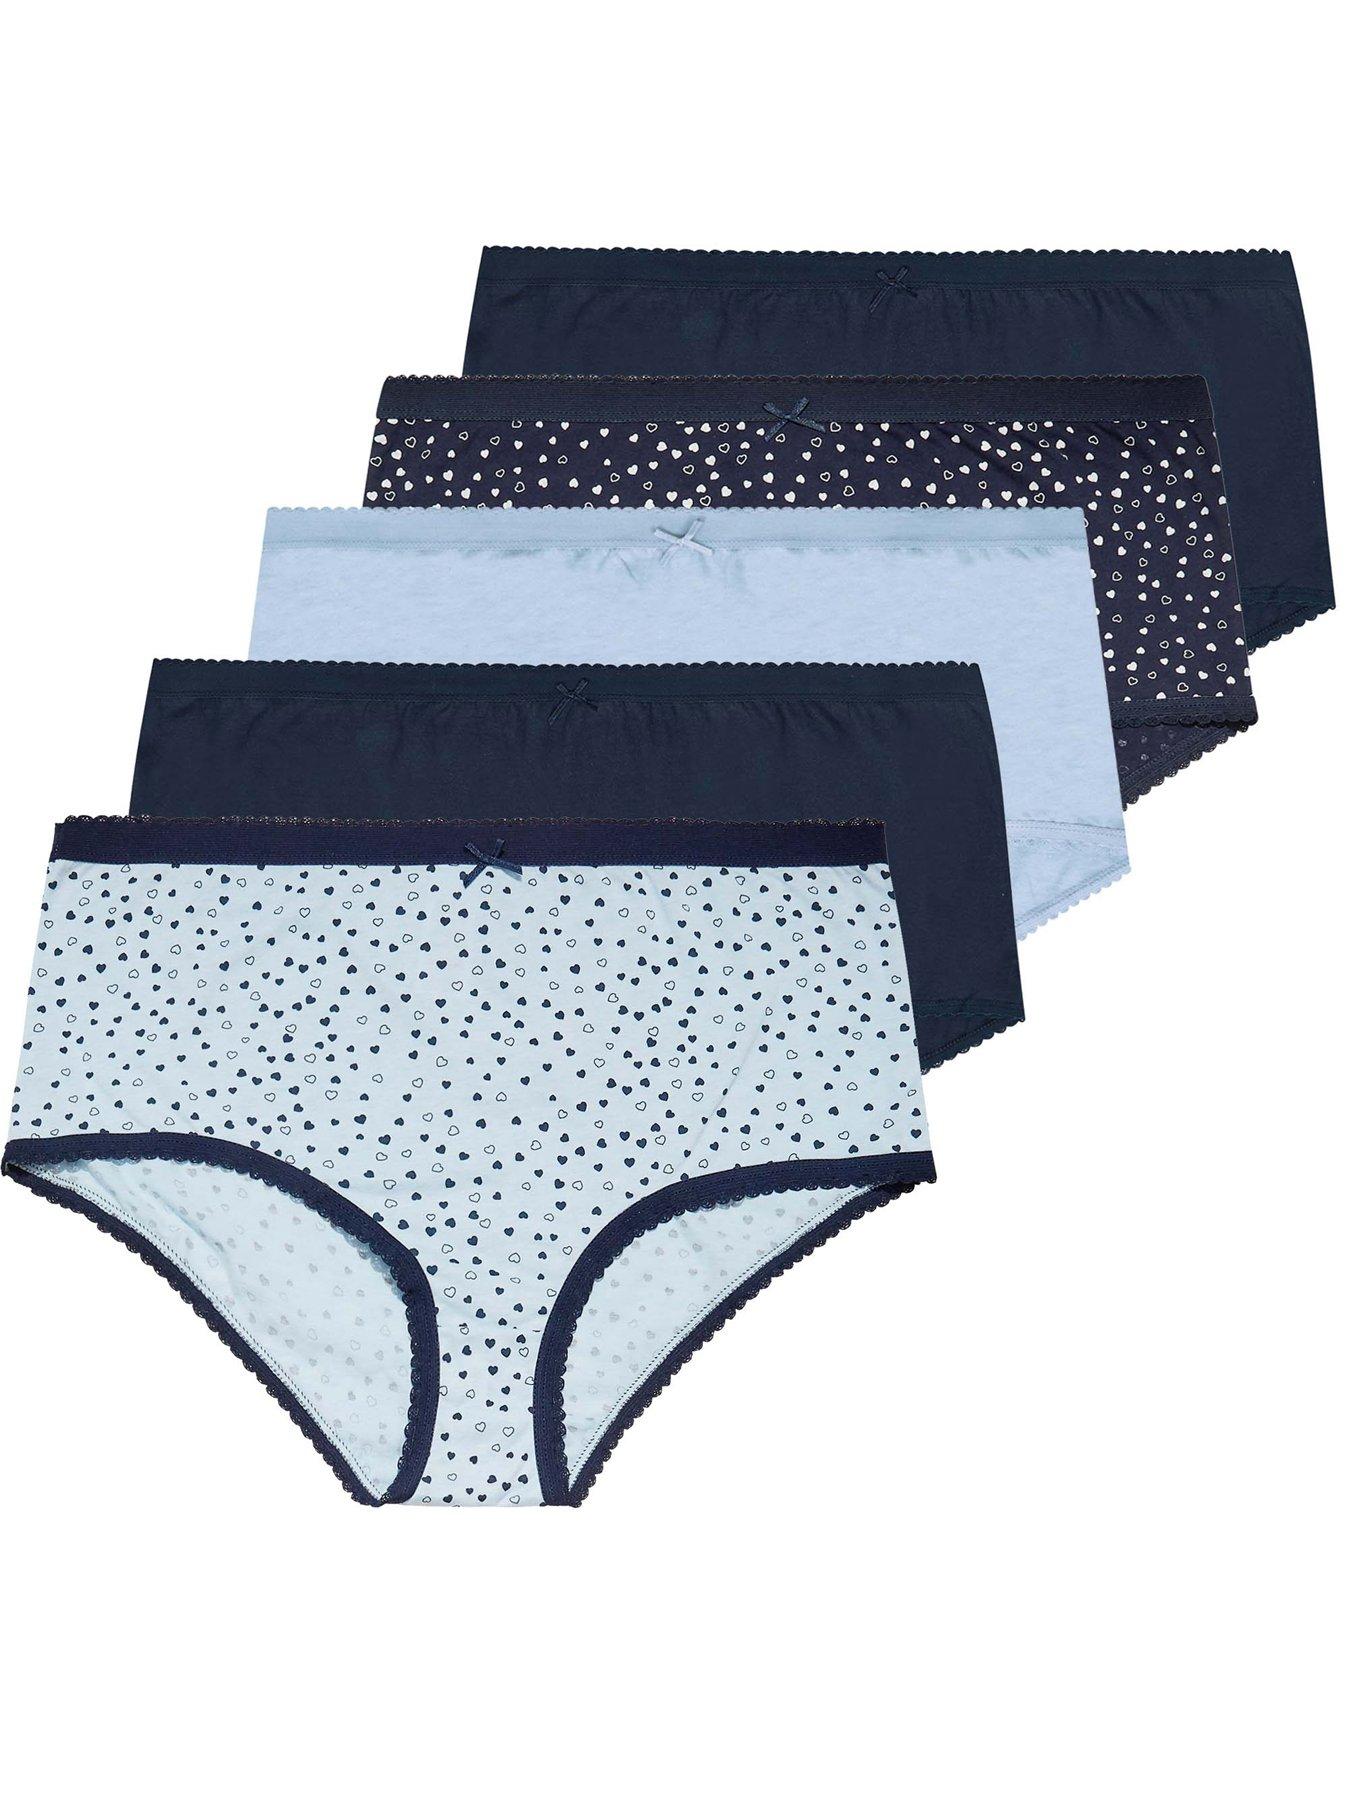 Patterned Mini Knickers 5 Pack, Lingerie